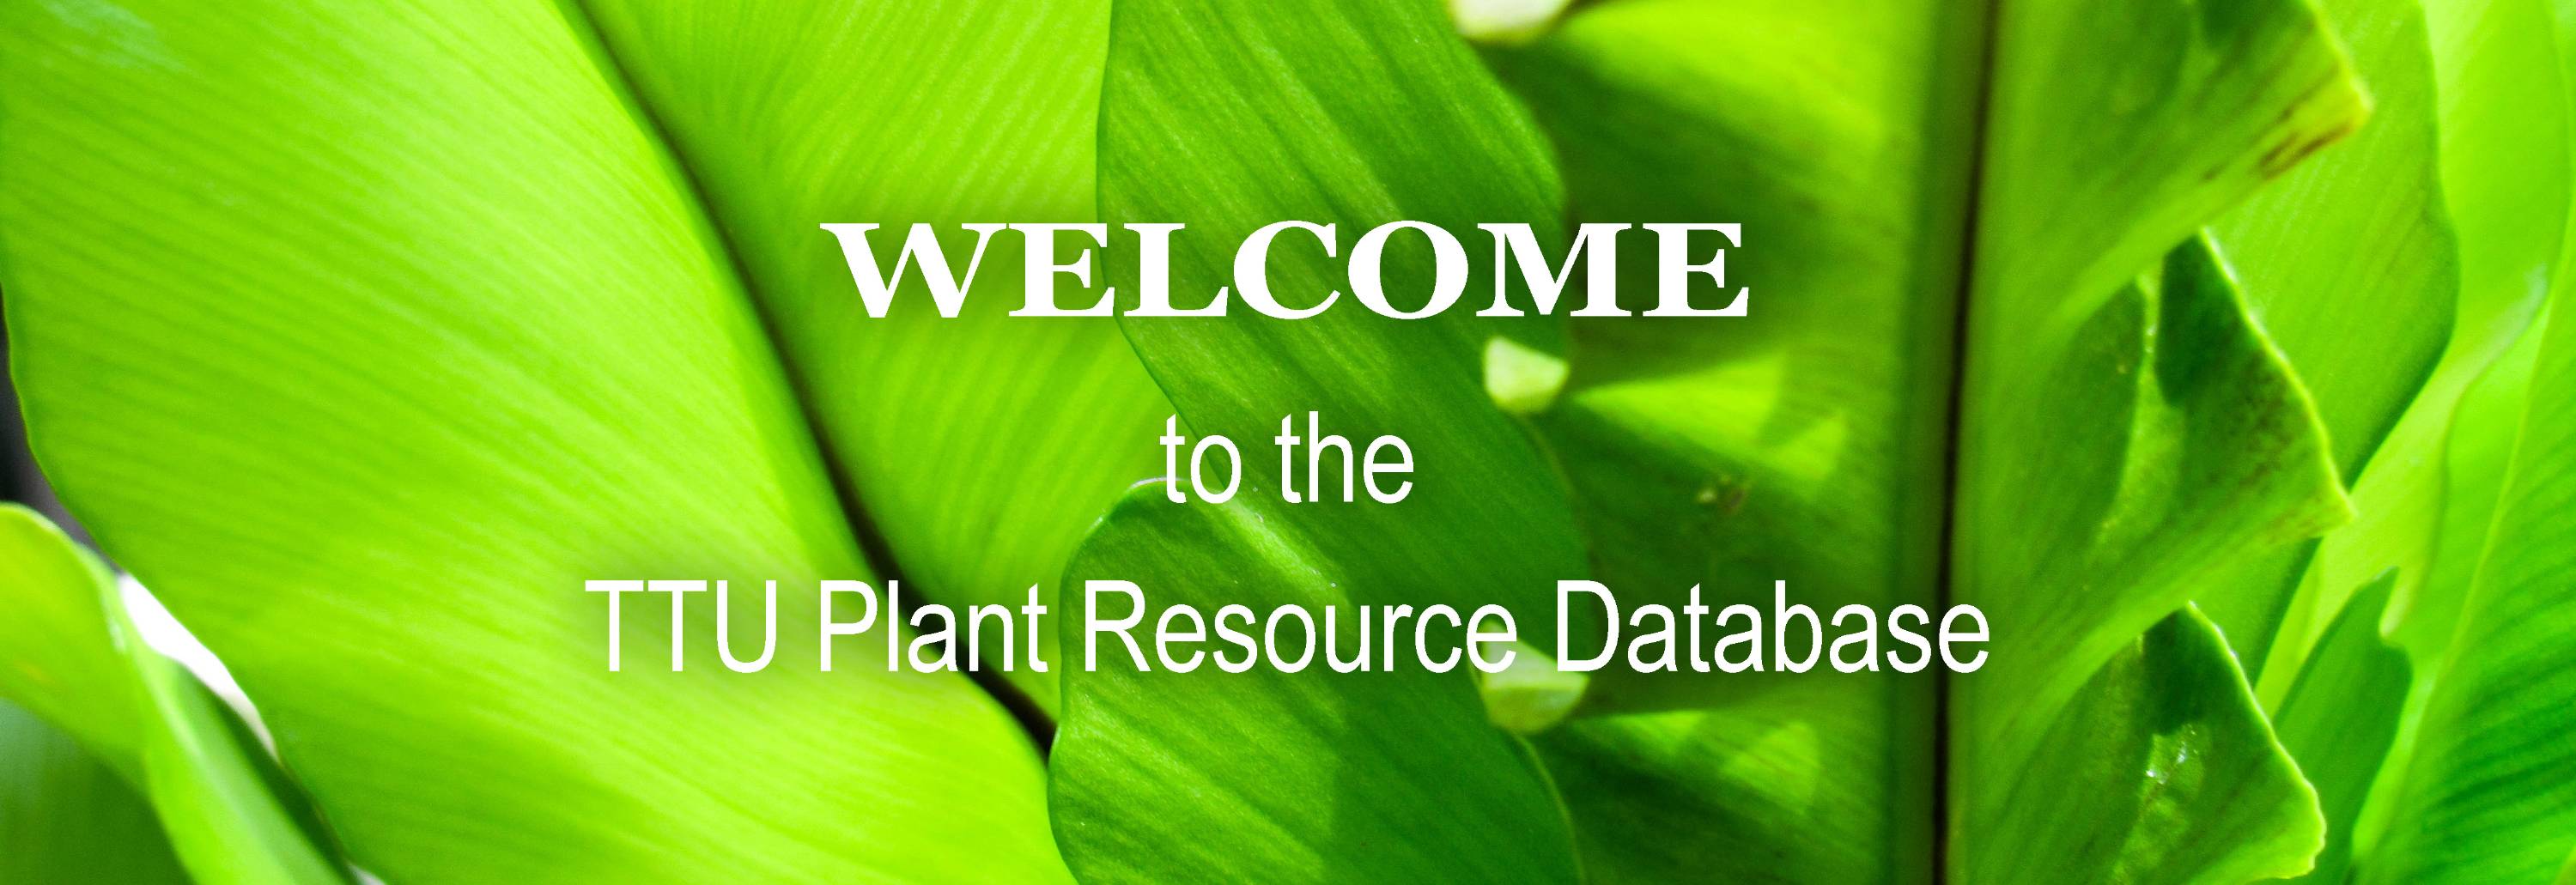 Welcome to the TTU Plant Resource Database